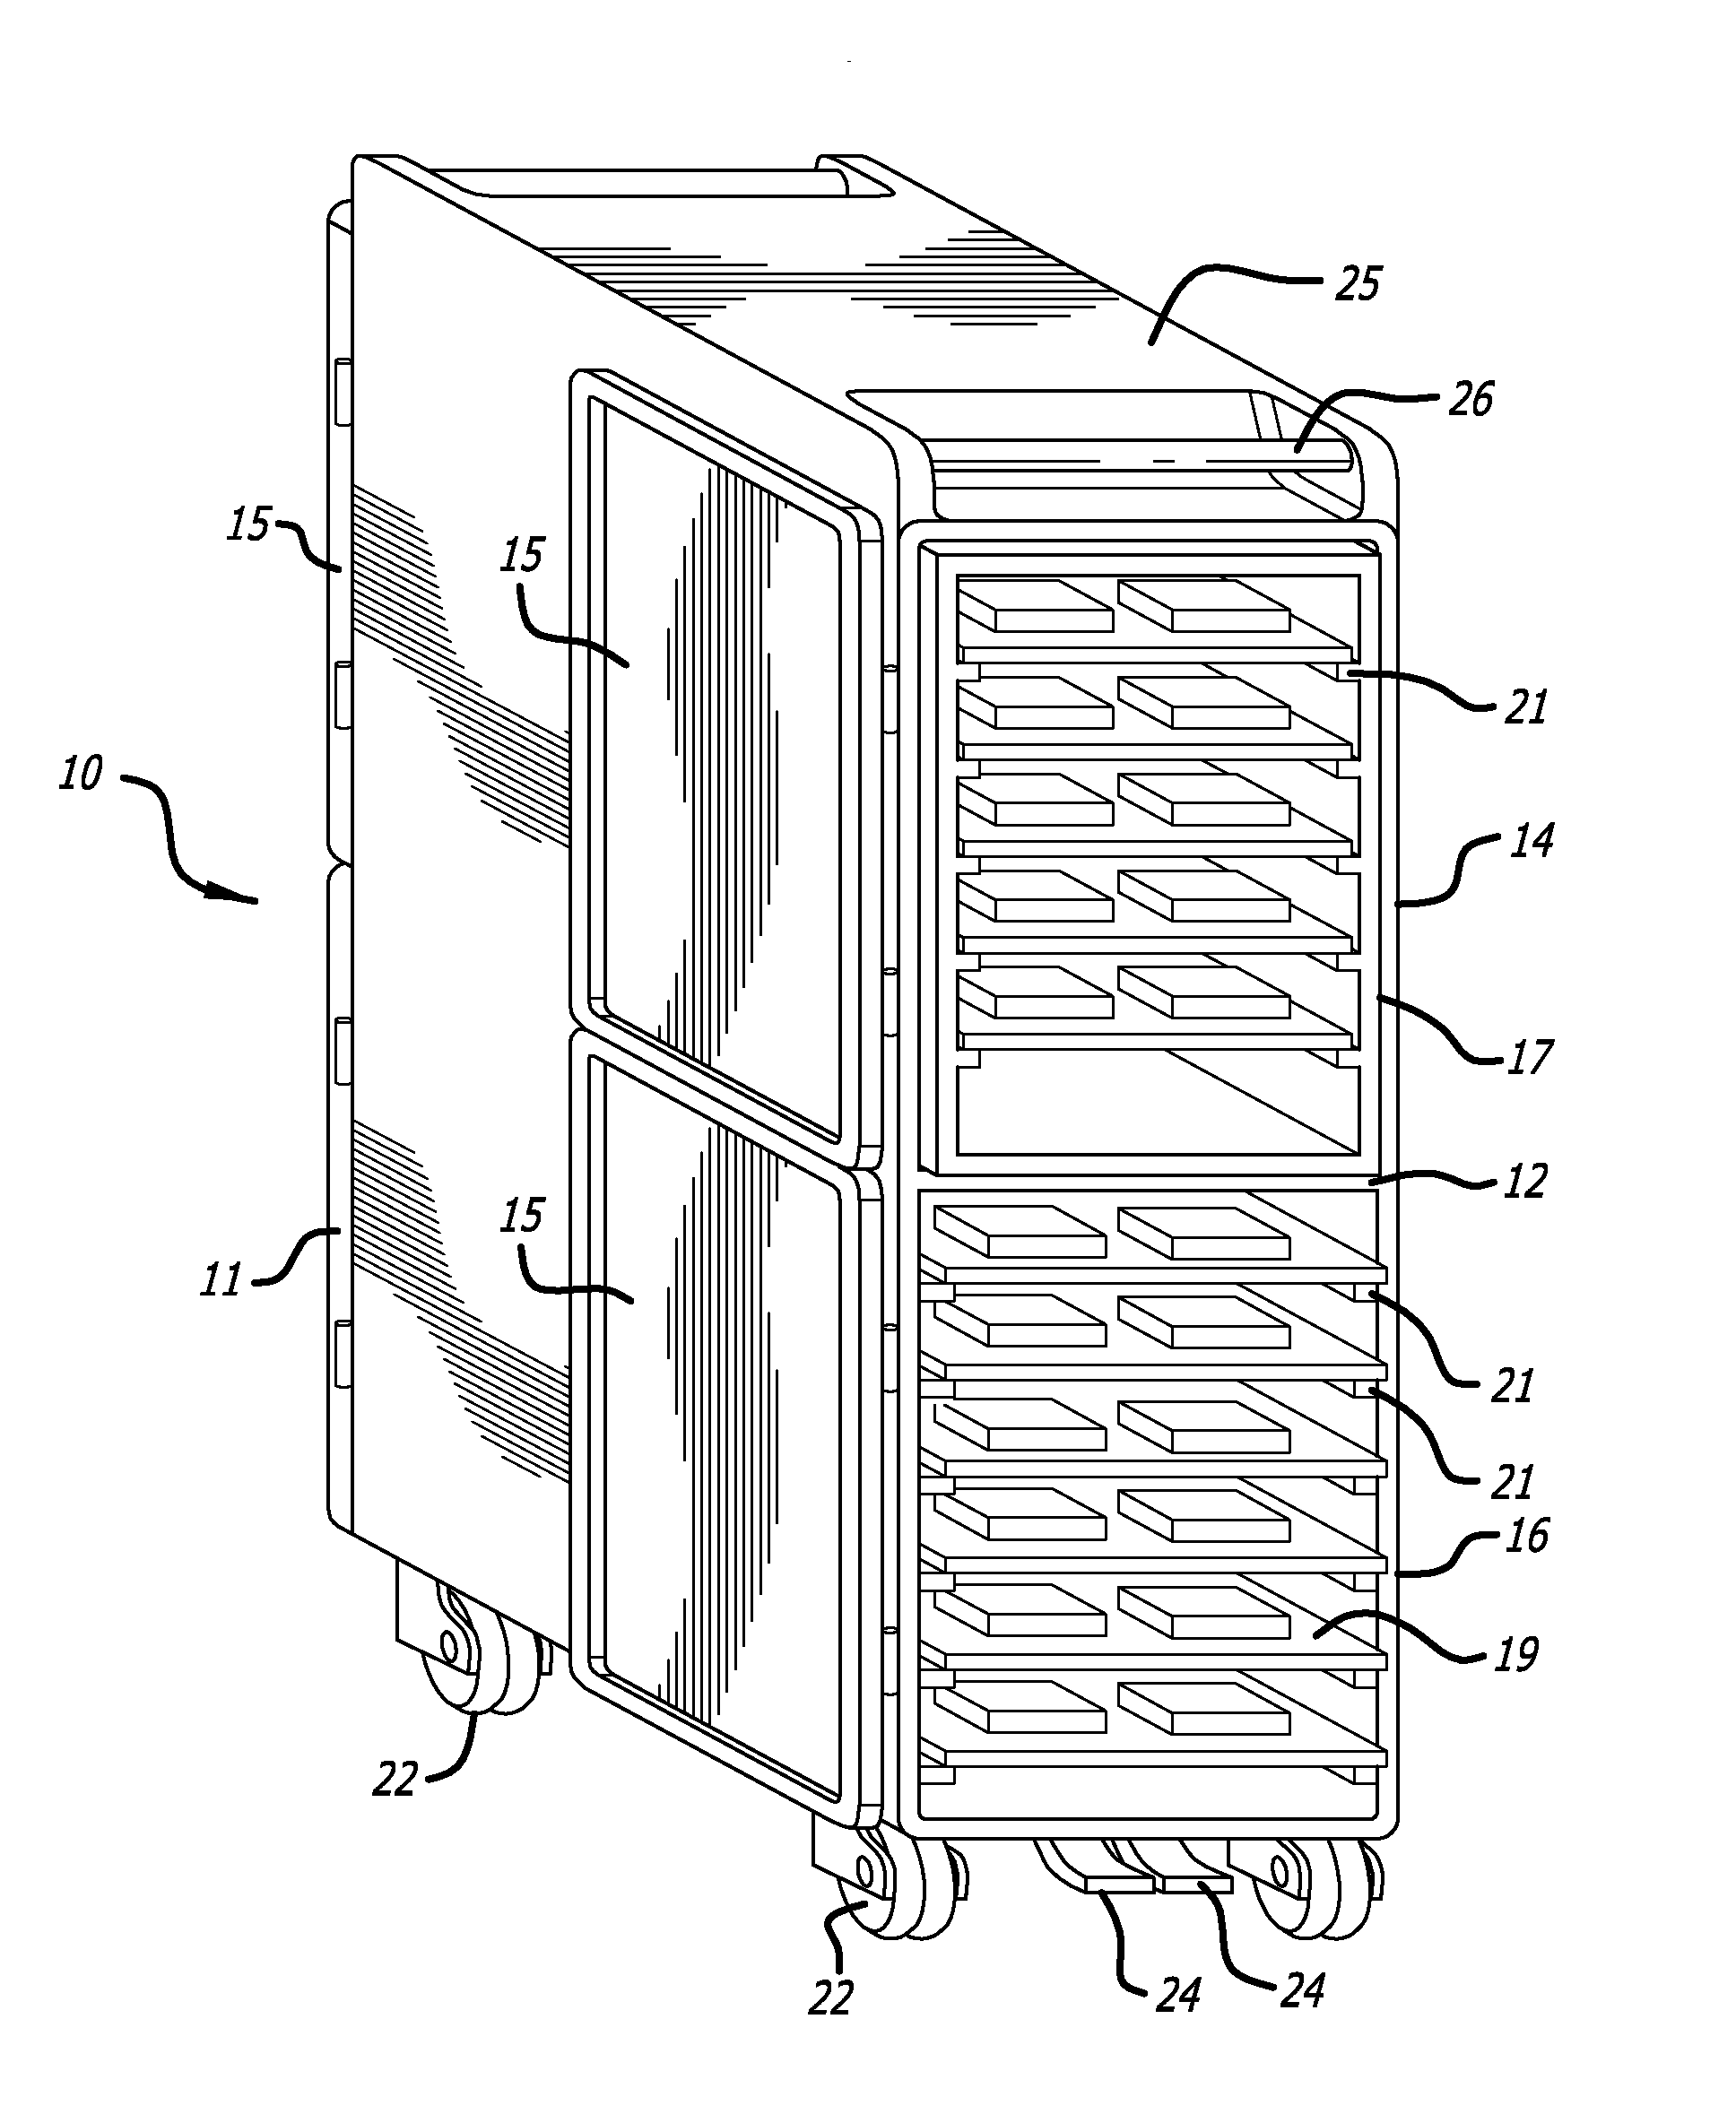 Meal cart for an aircraft galley